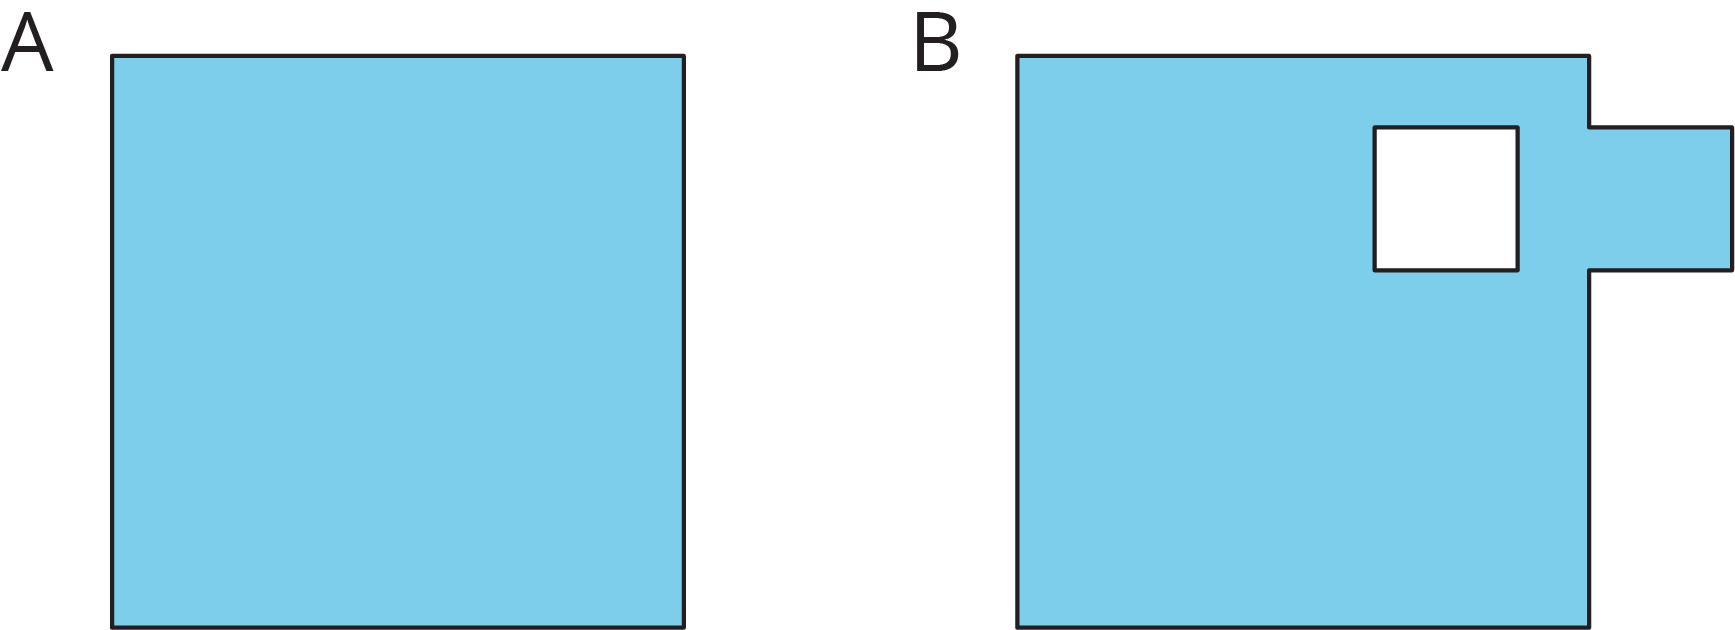 Square A, shaded. Square B identical to A, with a small shaded square removed in the middle and a small shaded square appended to its side.